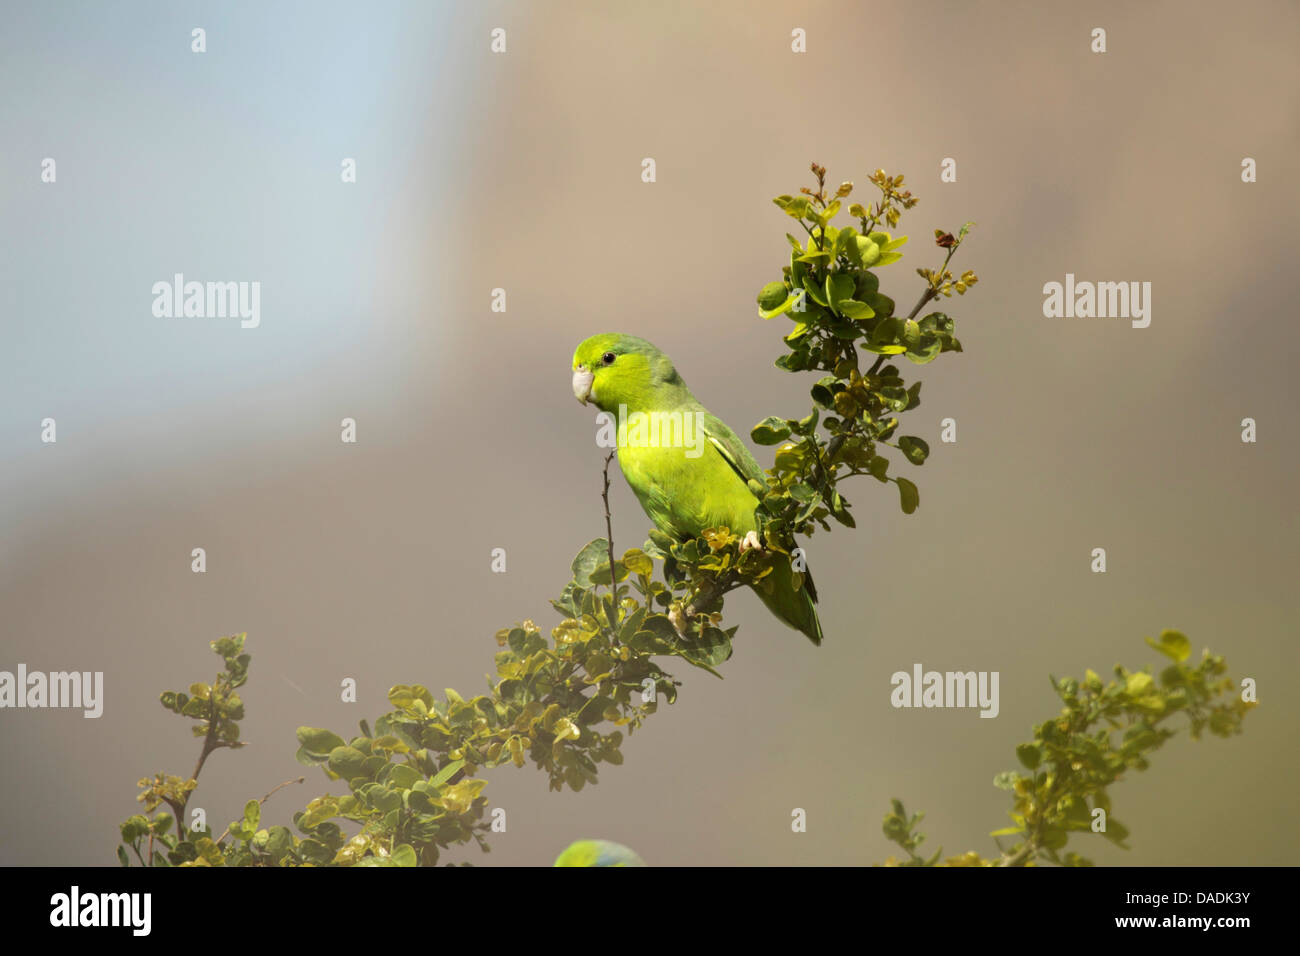 Pacific parrotlet (Forpus coelestis), sitting on a branch, Peru, Lambayeque, Reserva Chaparri Stock Photo